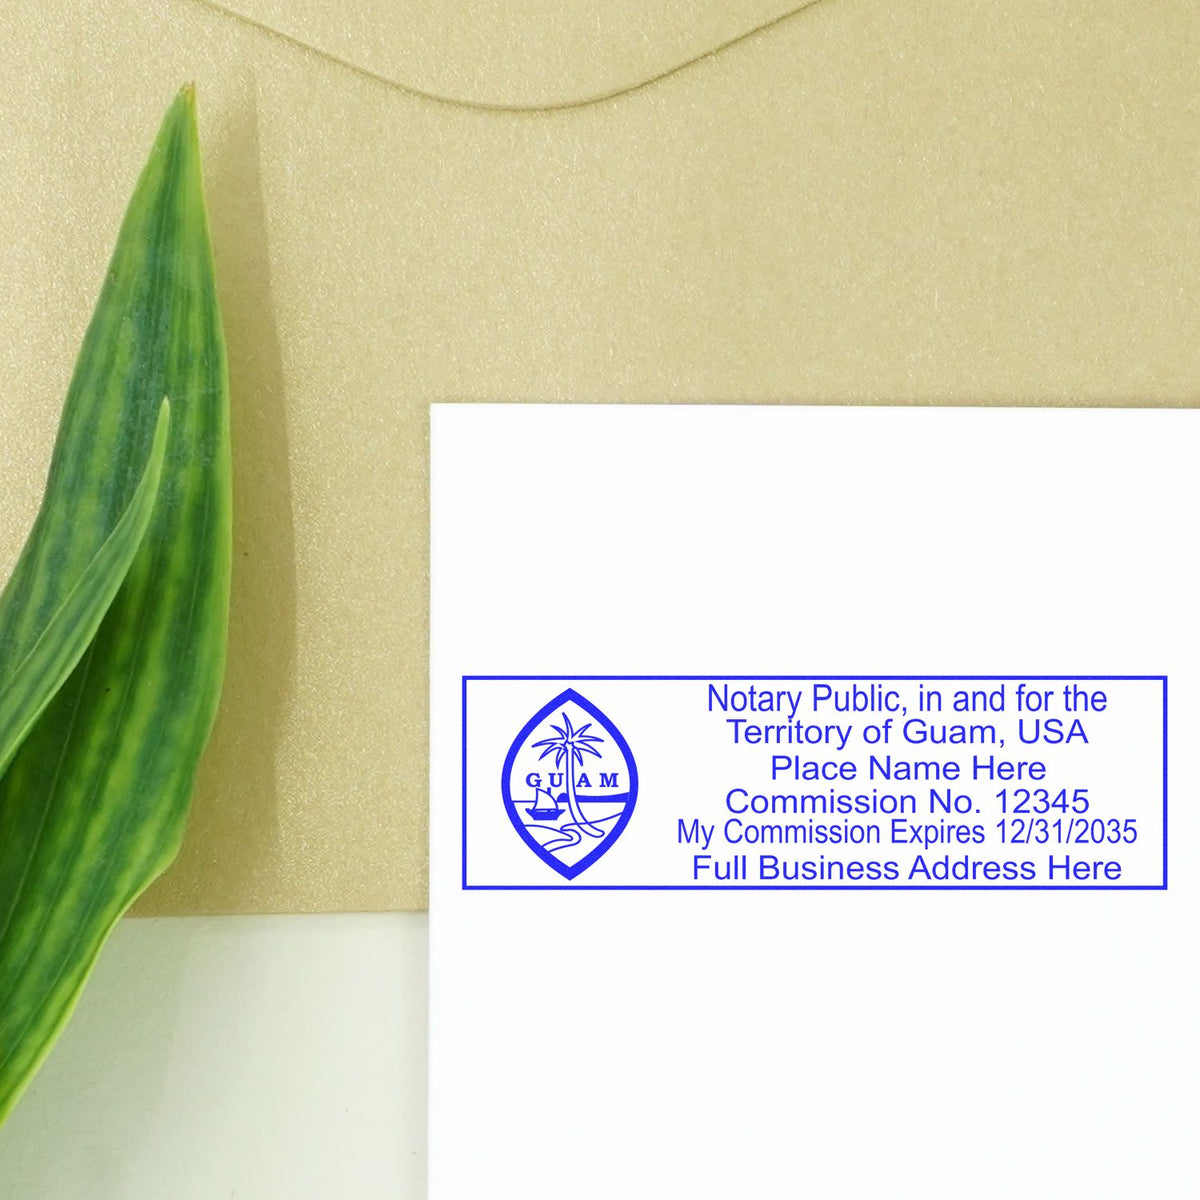 An alternative view of the Heavy-Duty Guam Rectangular Notary Stamp stamped on a sheet of paper showing the image in use